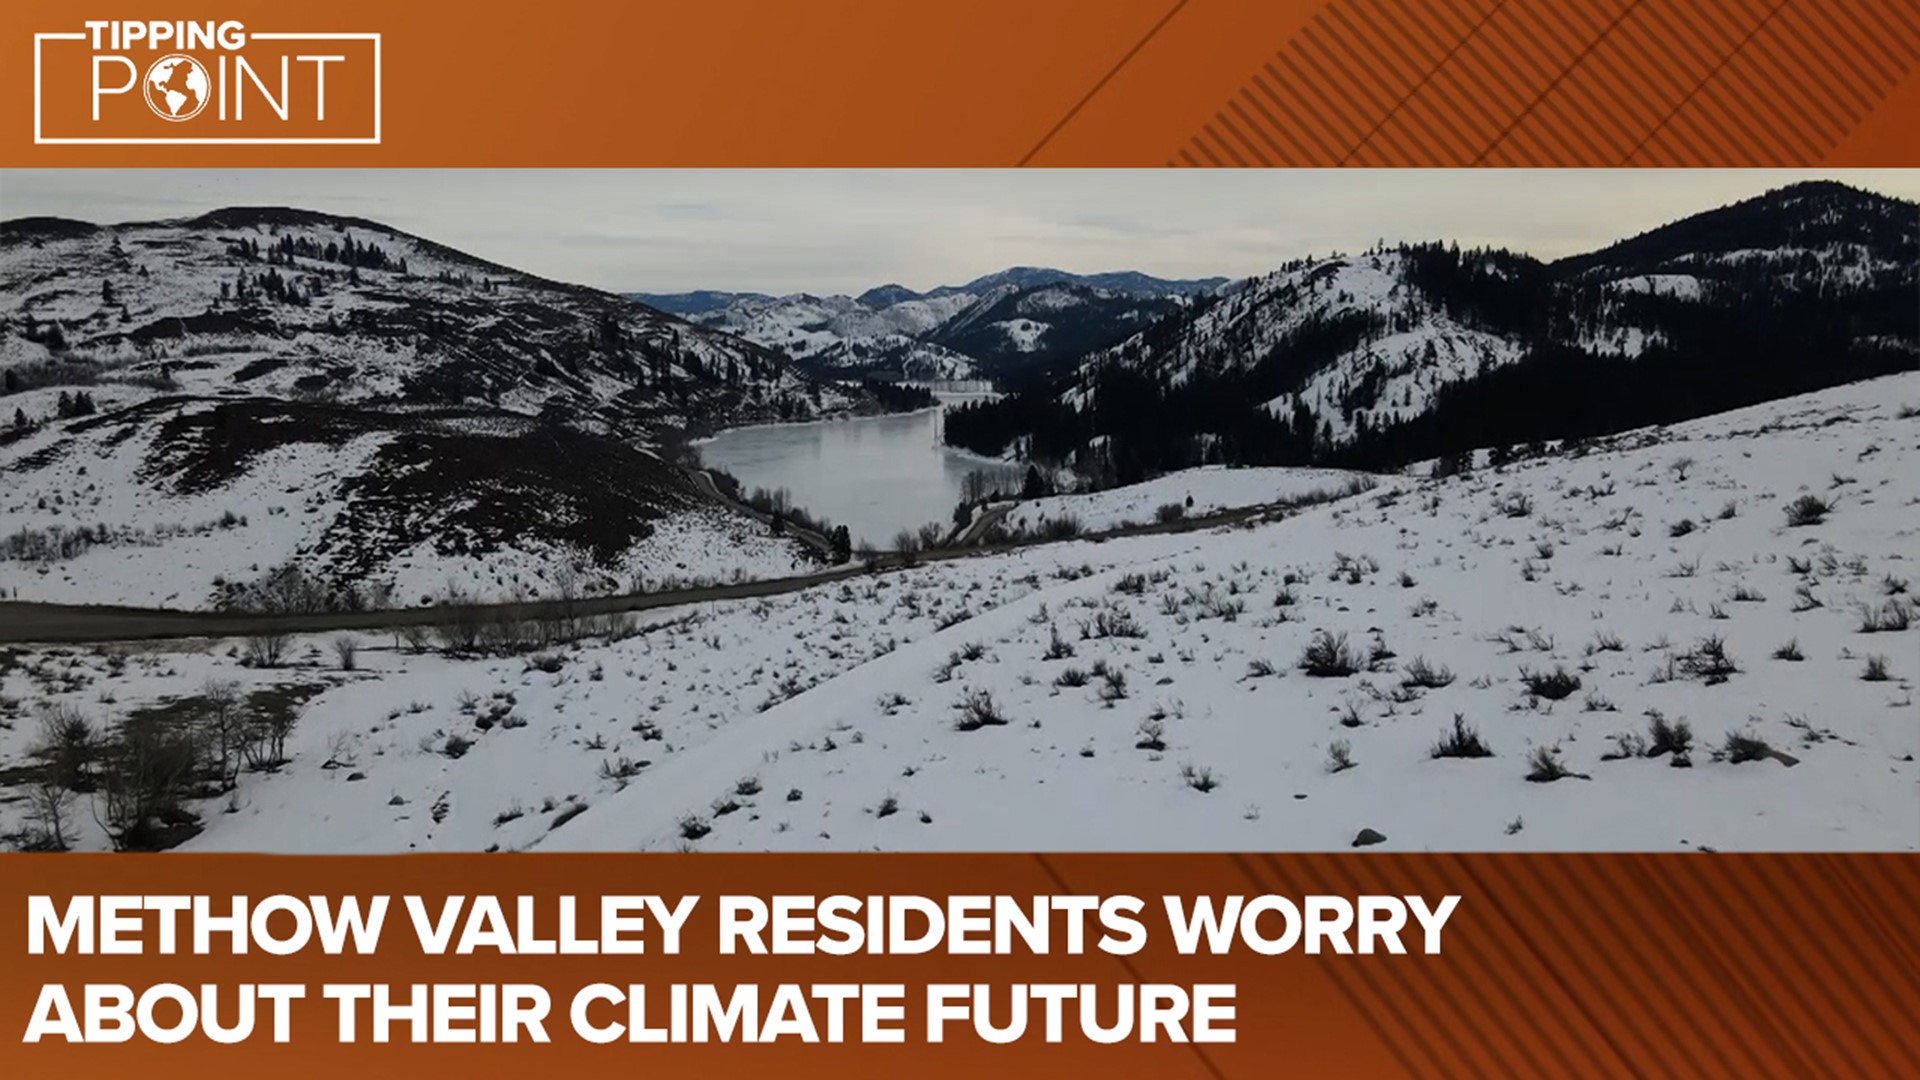 If the environment is the spine for the Methow Valley, it almost had its back broken in the past year.